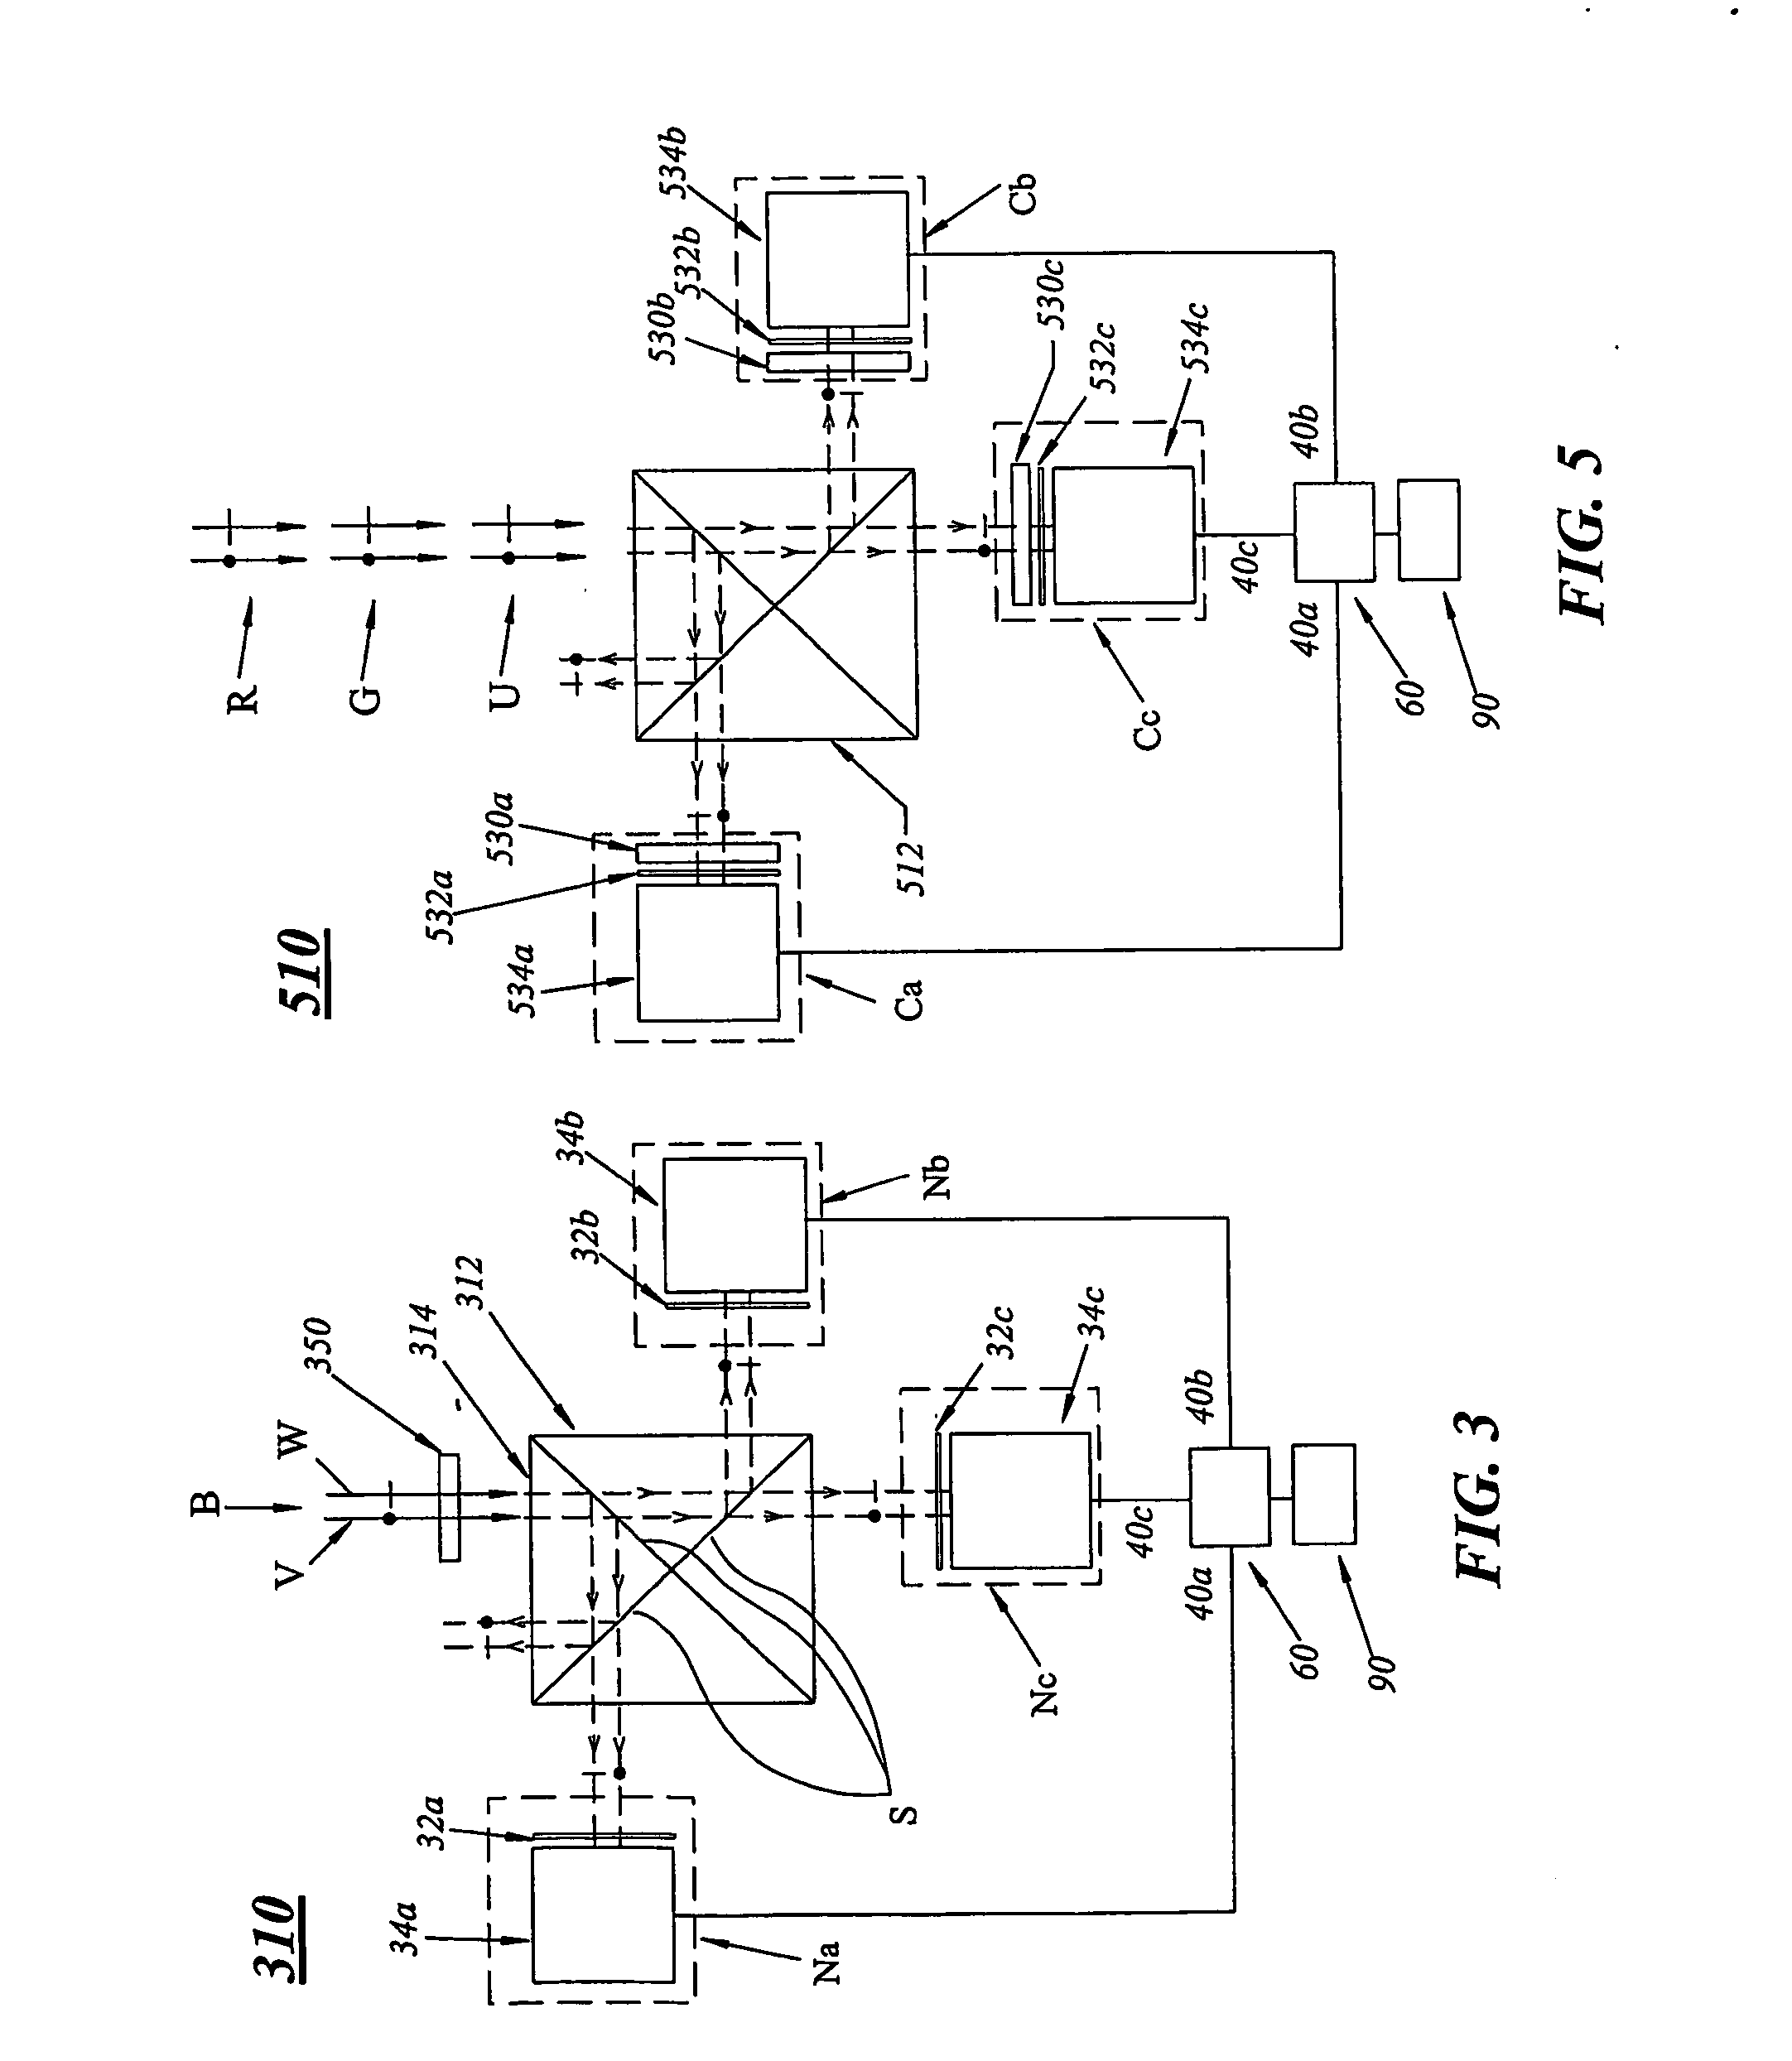 Simultaneous phase shifting module for use in interferometry